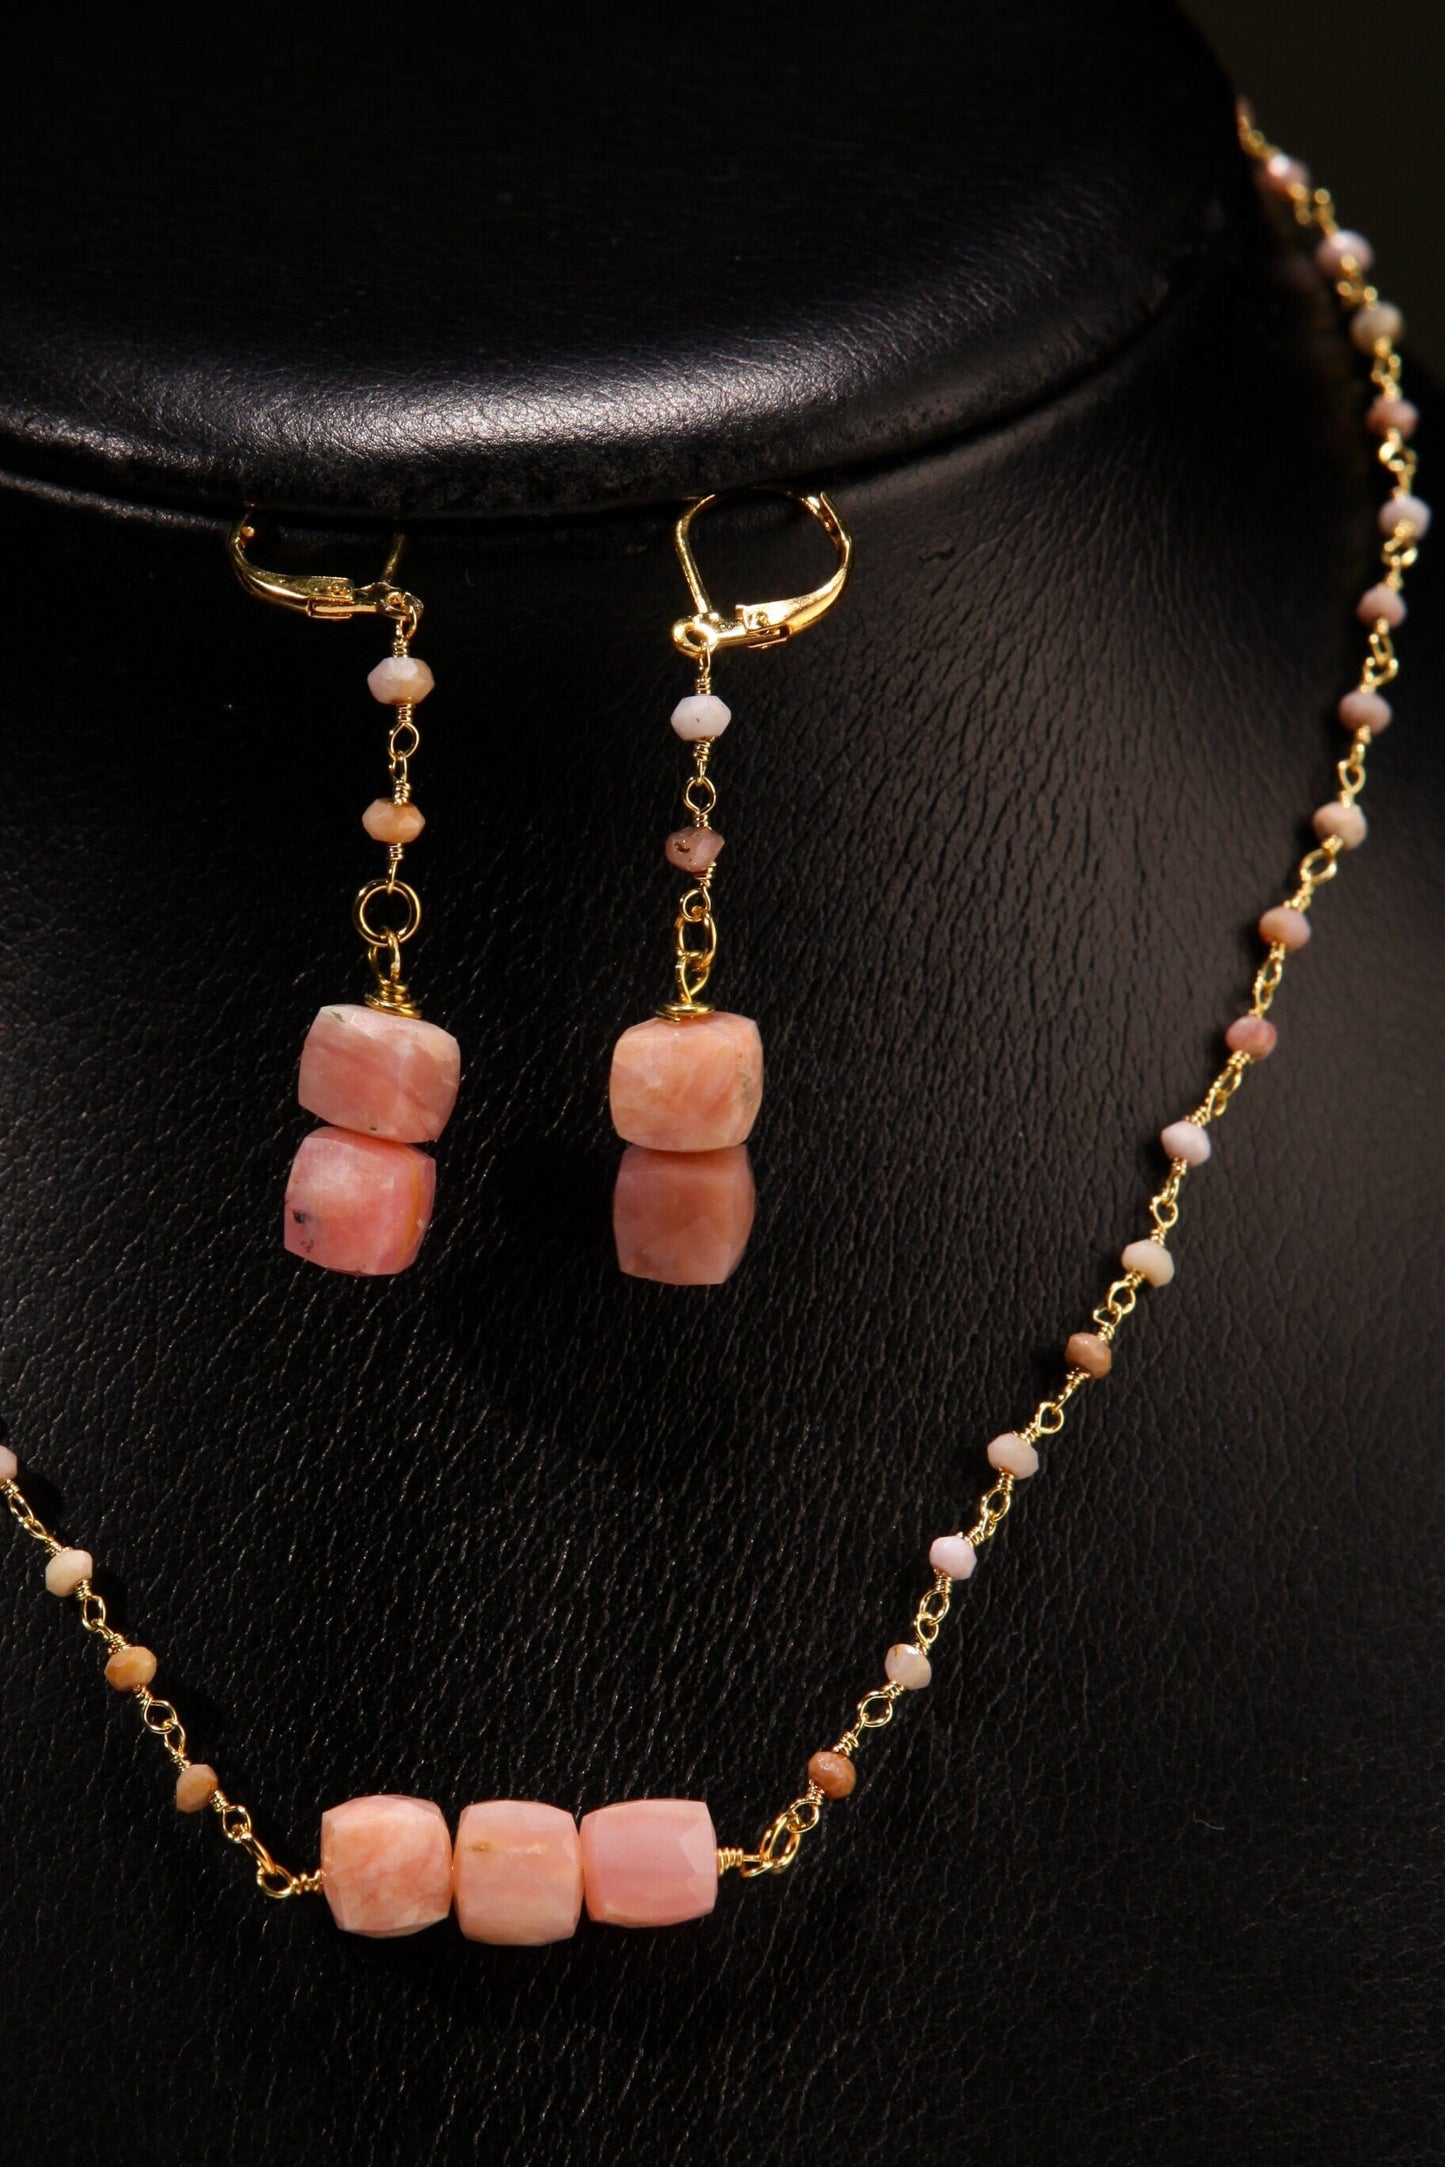 Natural Pink Peruvian Opal 8mm Cube Wire Wrapped, Pink Peruvian Opal Beaded Chain, Matching Leverback Earrings Set, Beautiful Pink Necklace